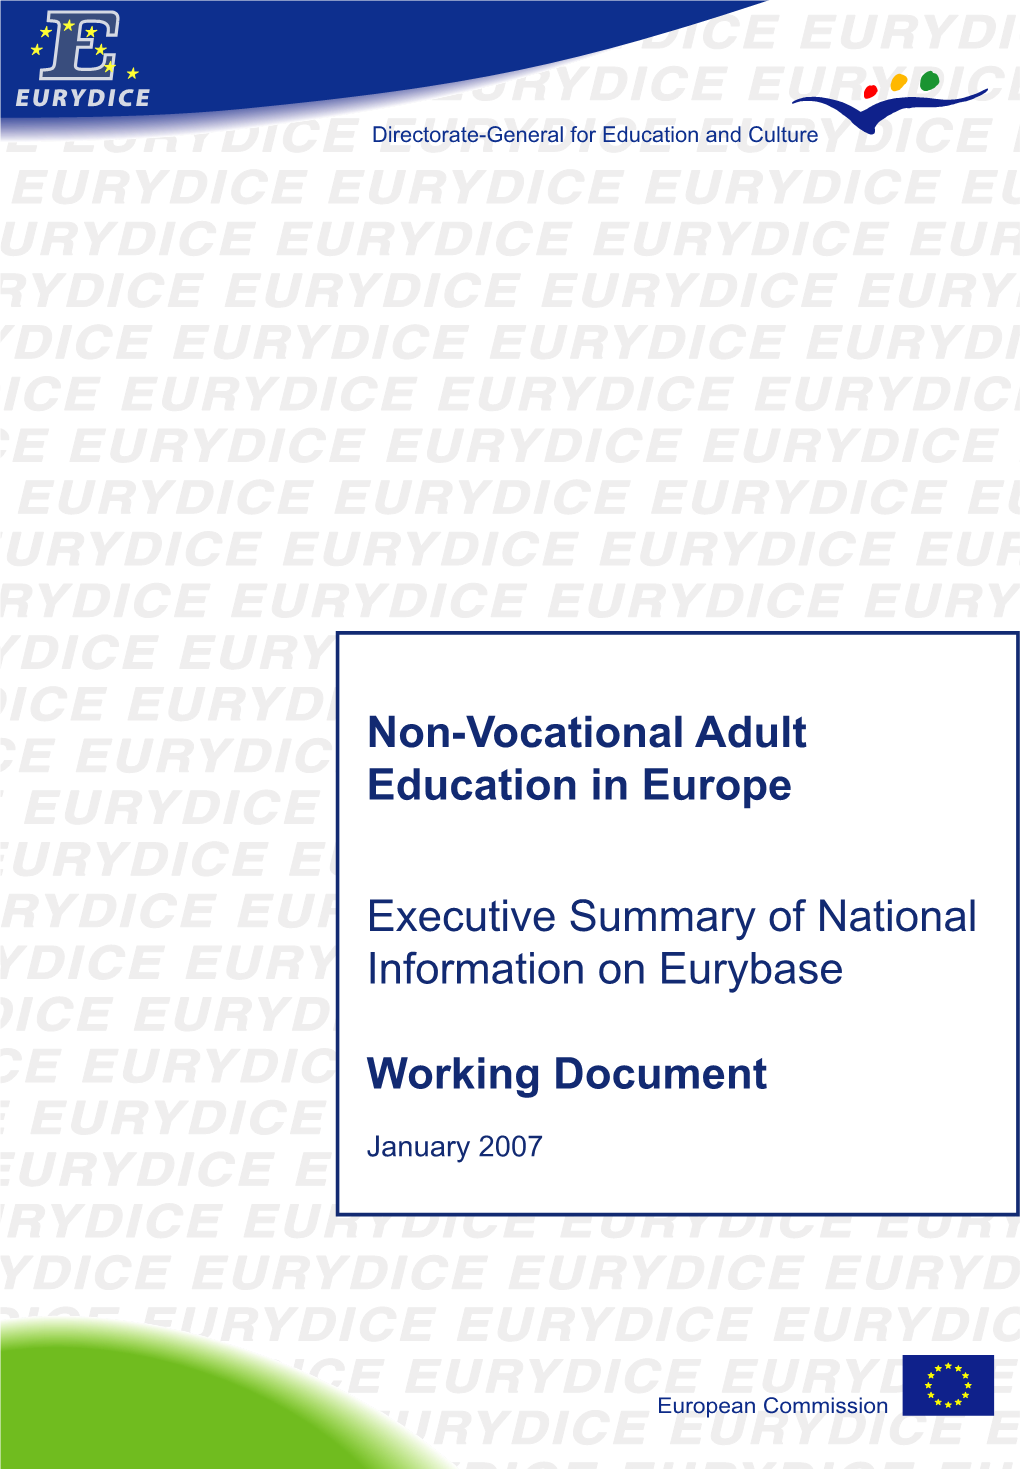 Non-Vocational Adult Education in Europe Executive Summary